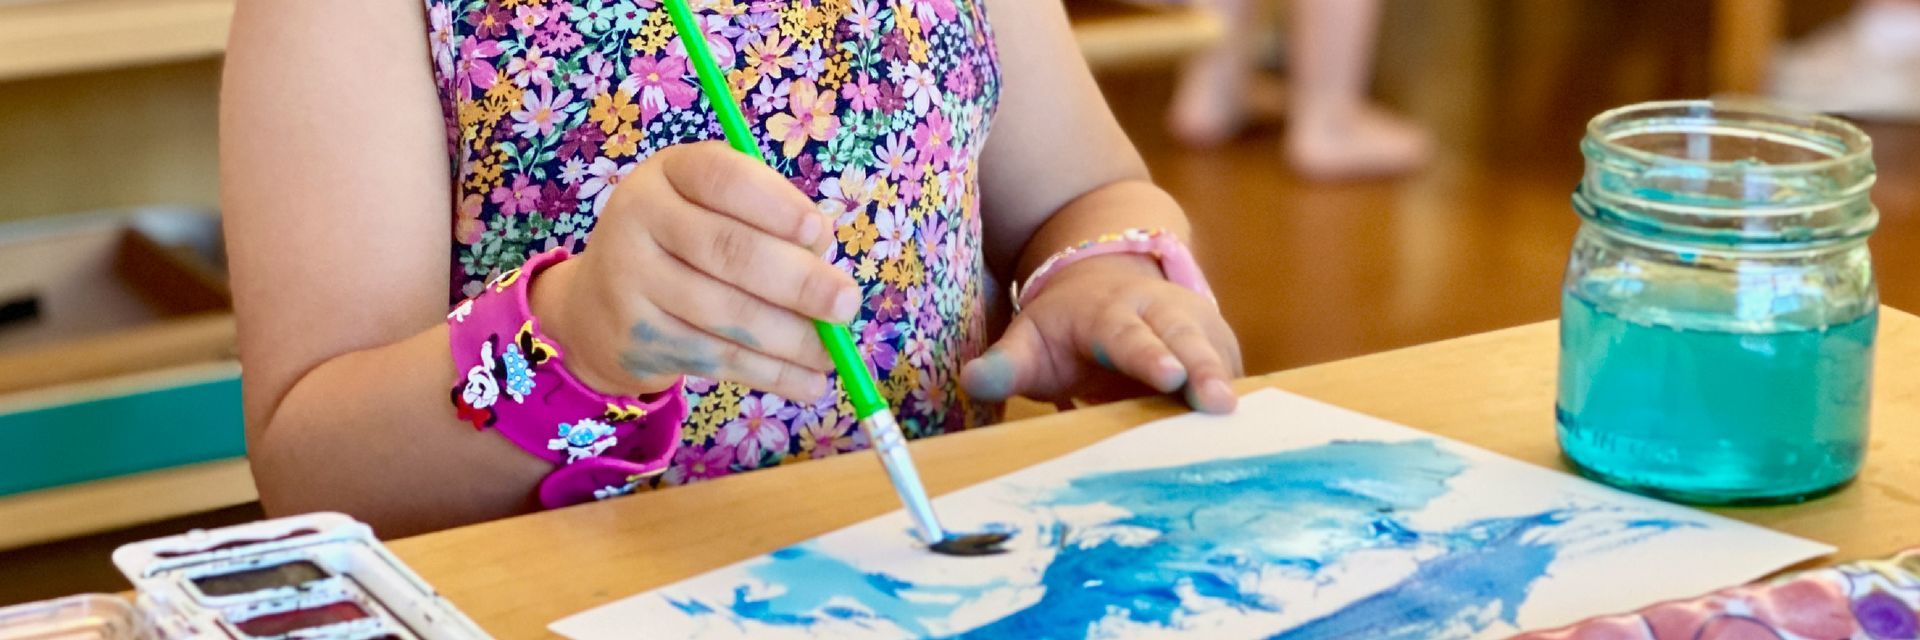 Close up cropped image of a child's arms using watercolor paints at a table